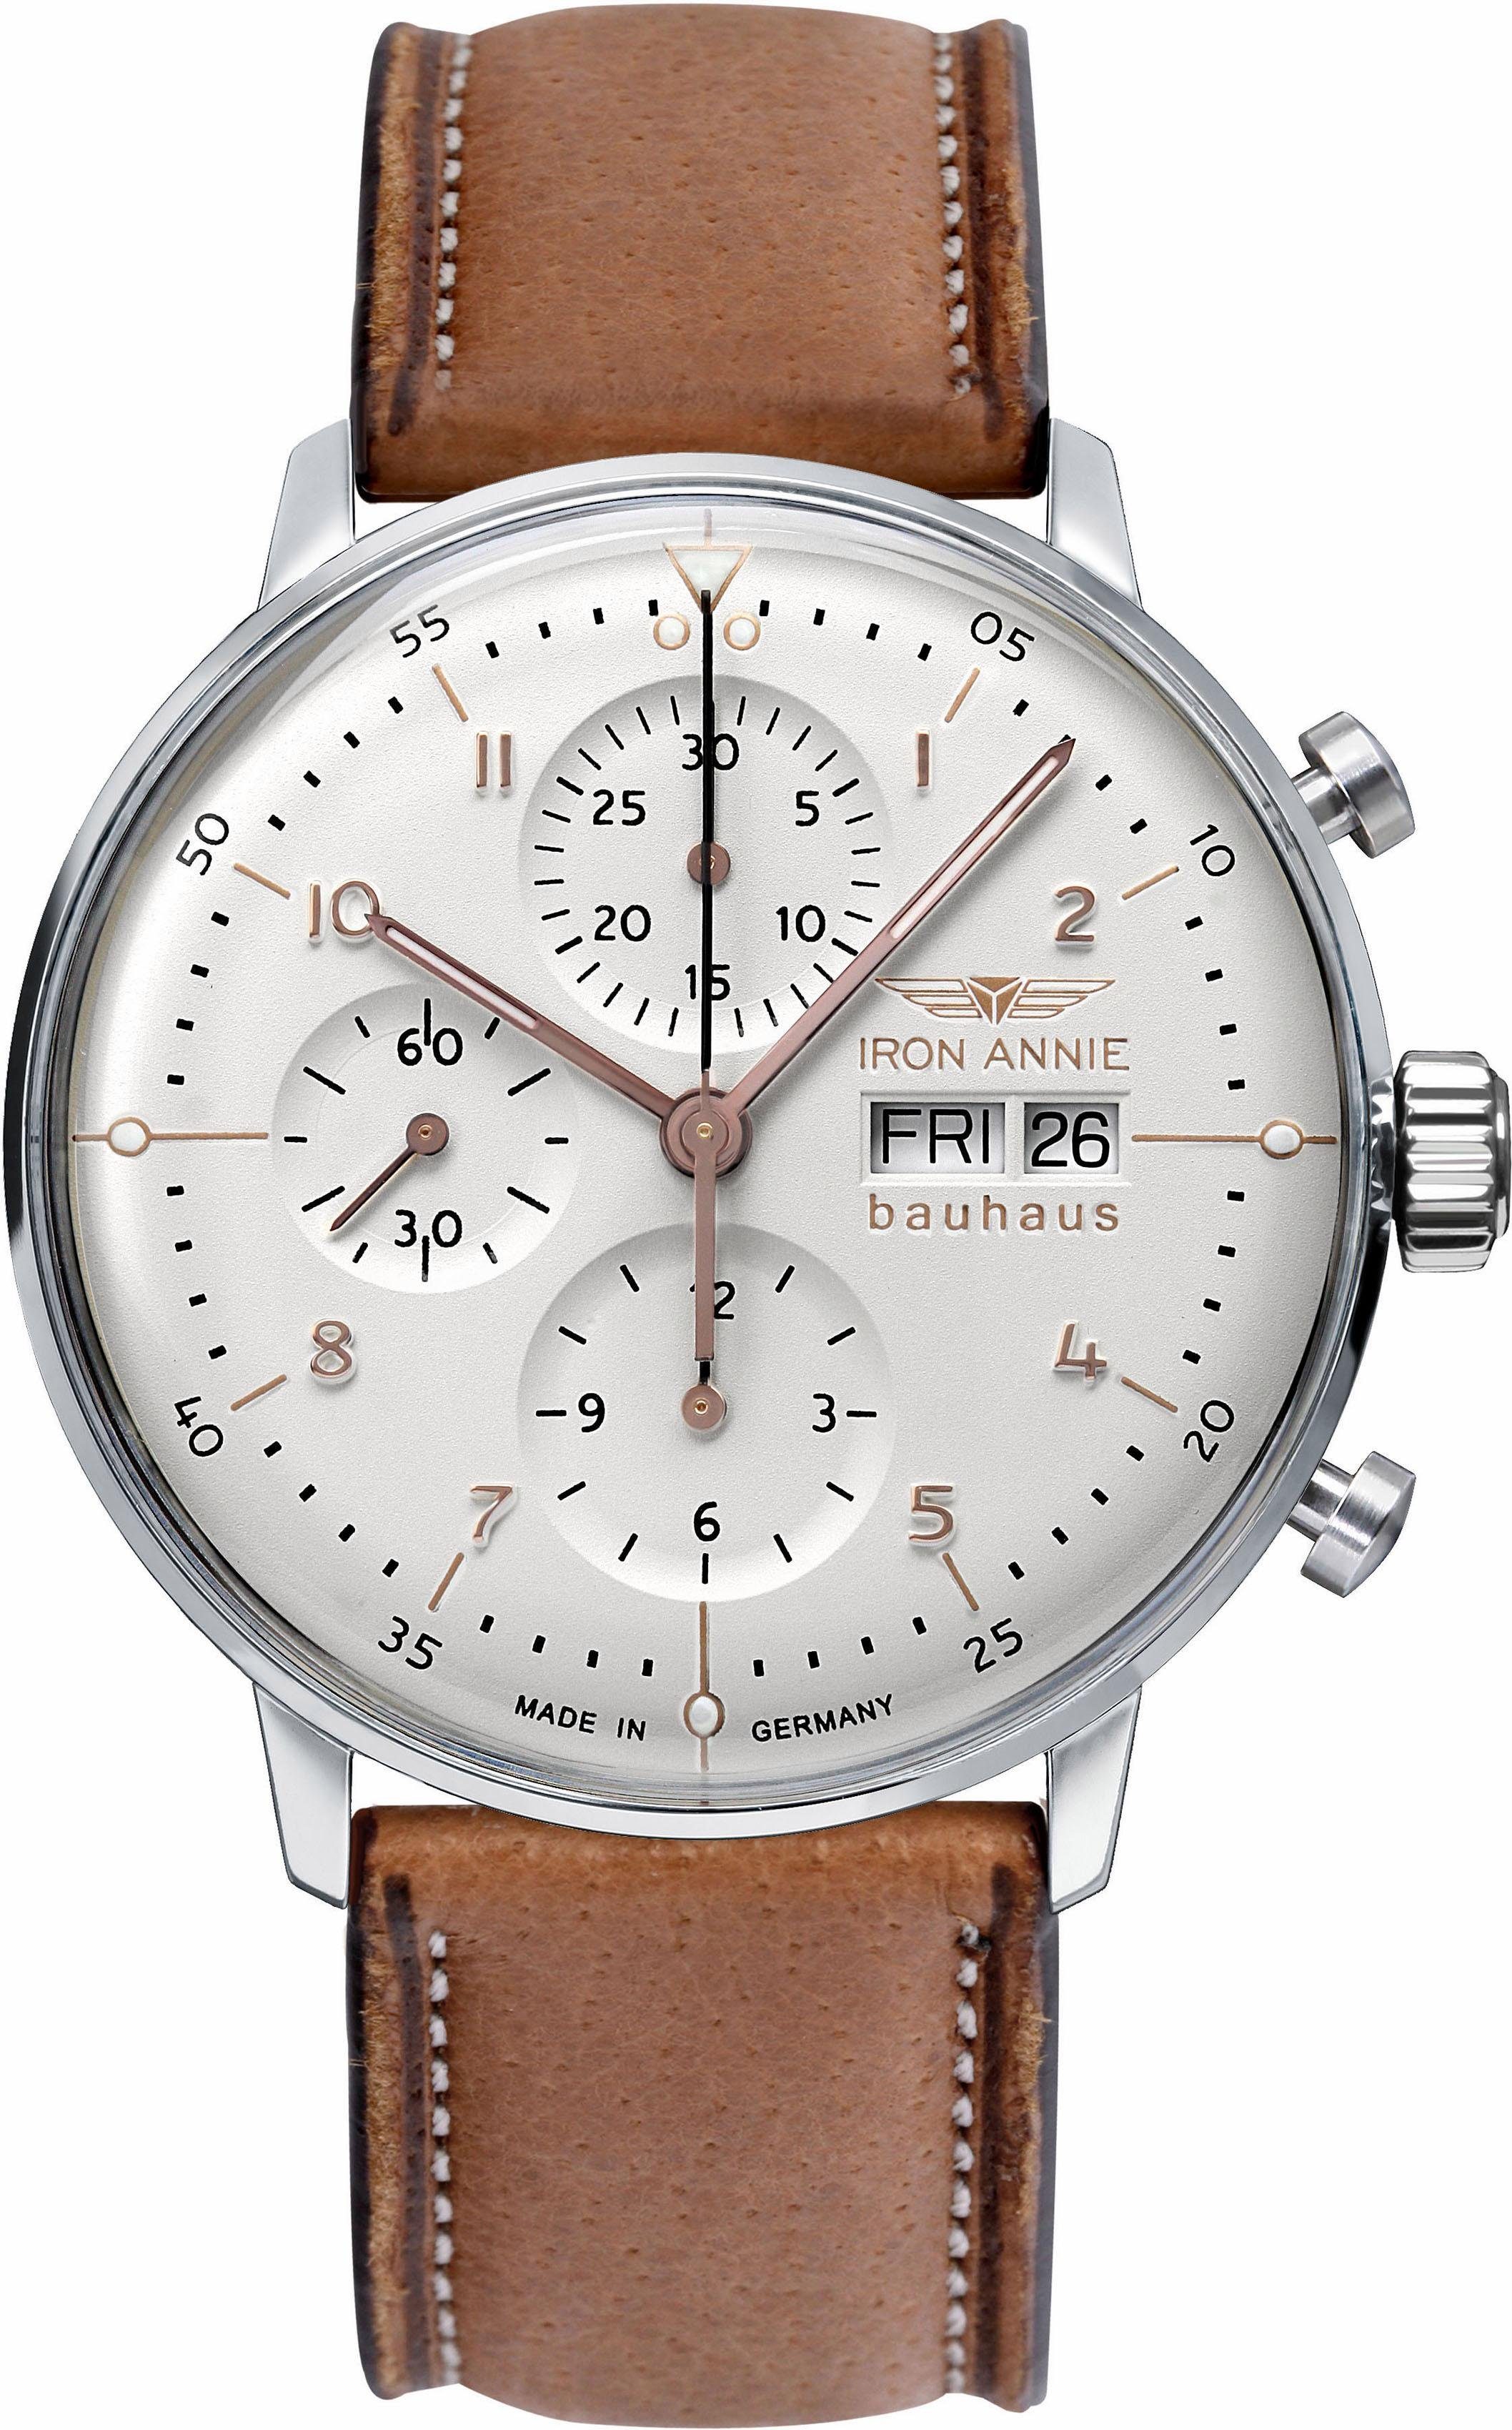 IRON ANNIE Chronograph Bauhaus, 5018-4, Made in Germany